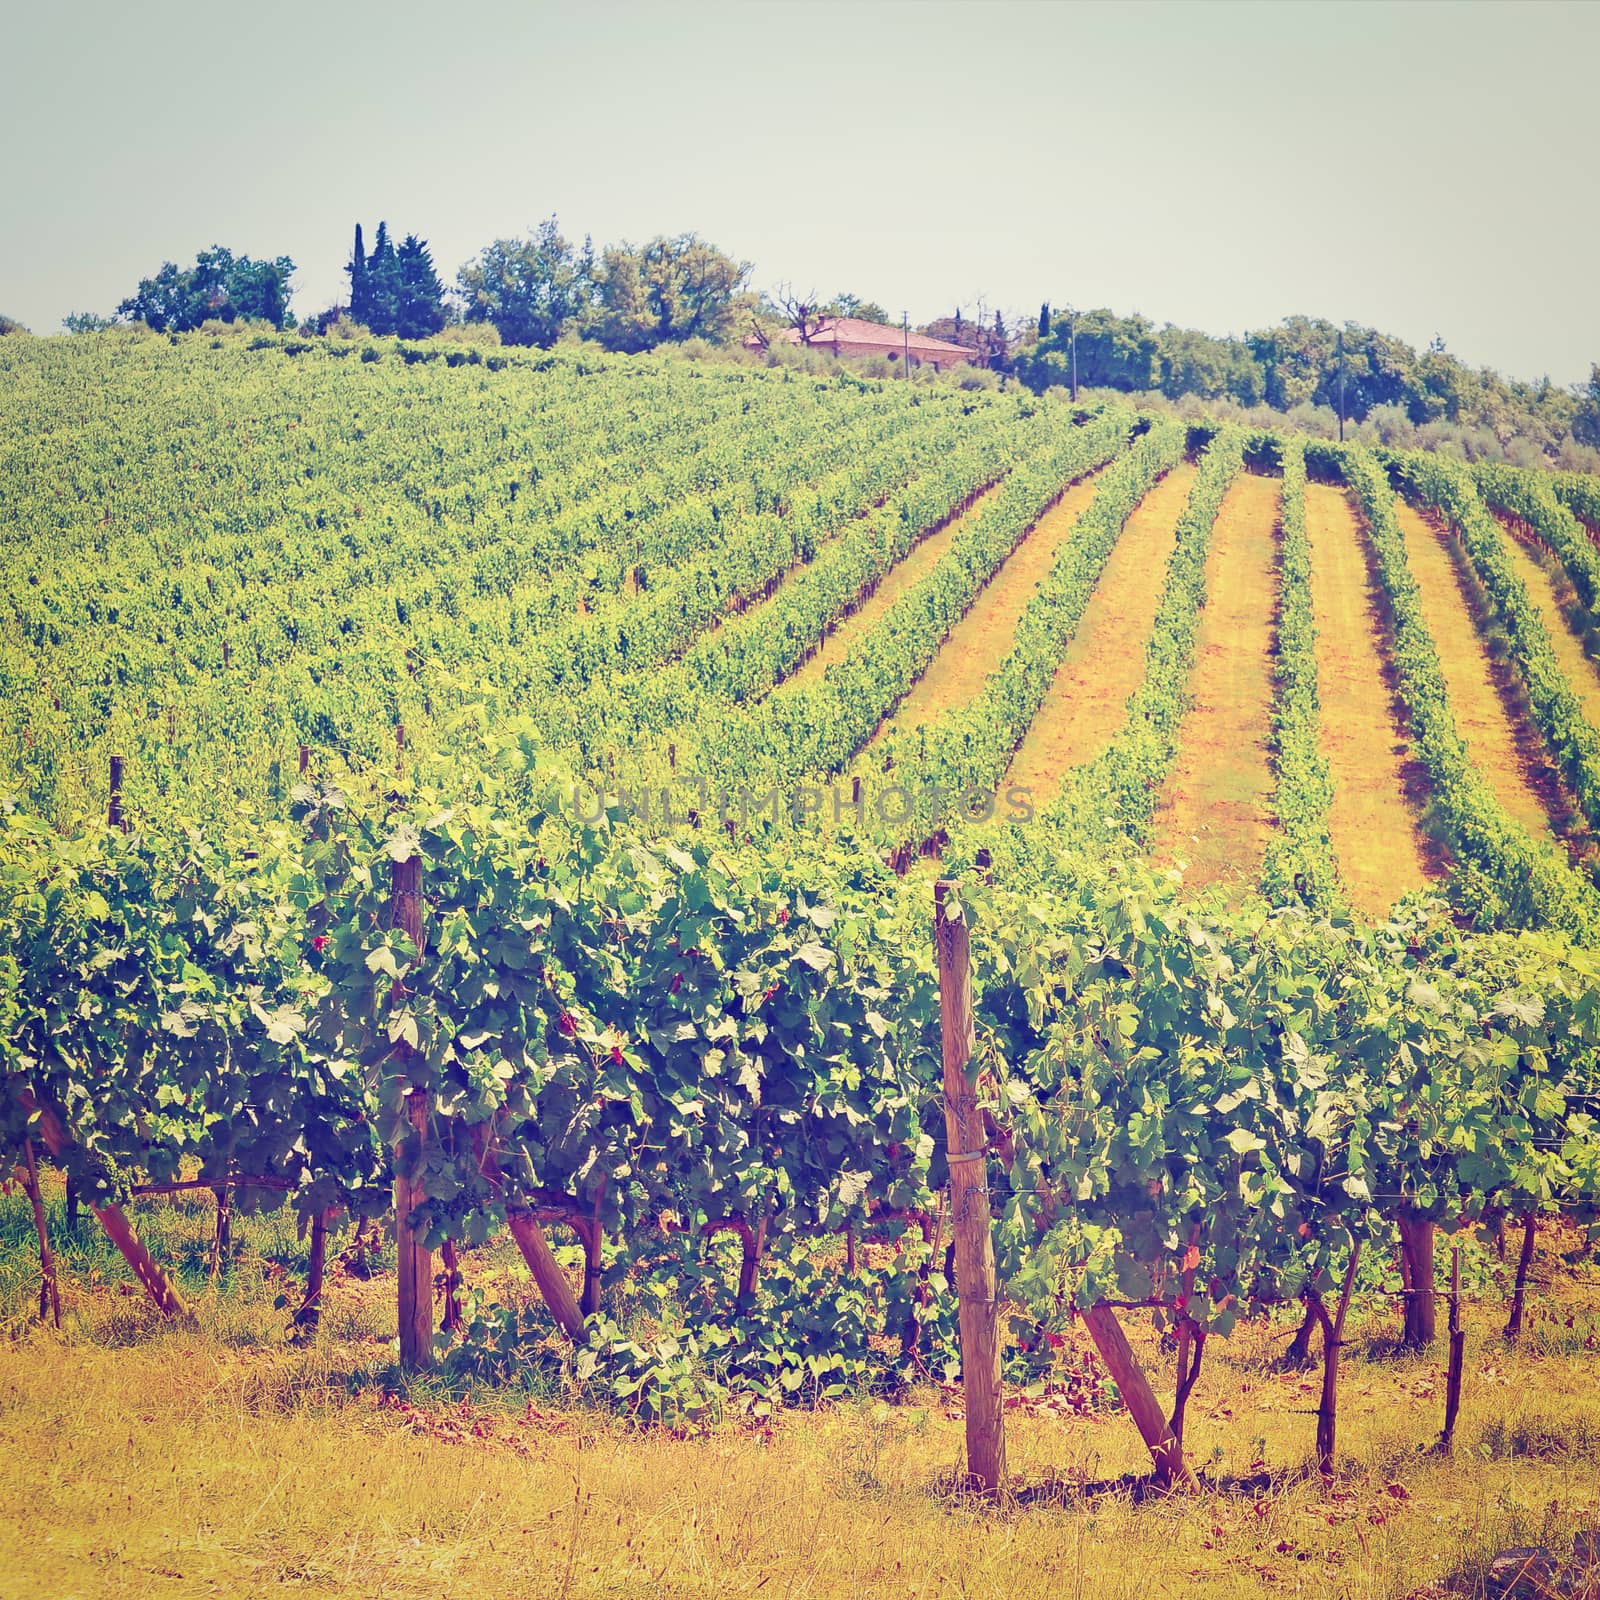 Hill of Tuscany with Vineyard in the Chianti Region, Retro Effect